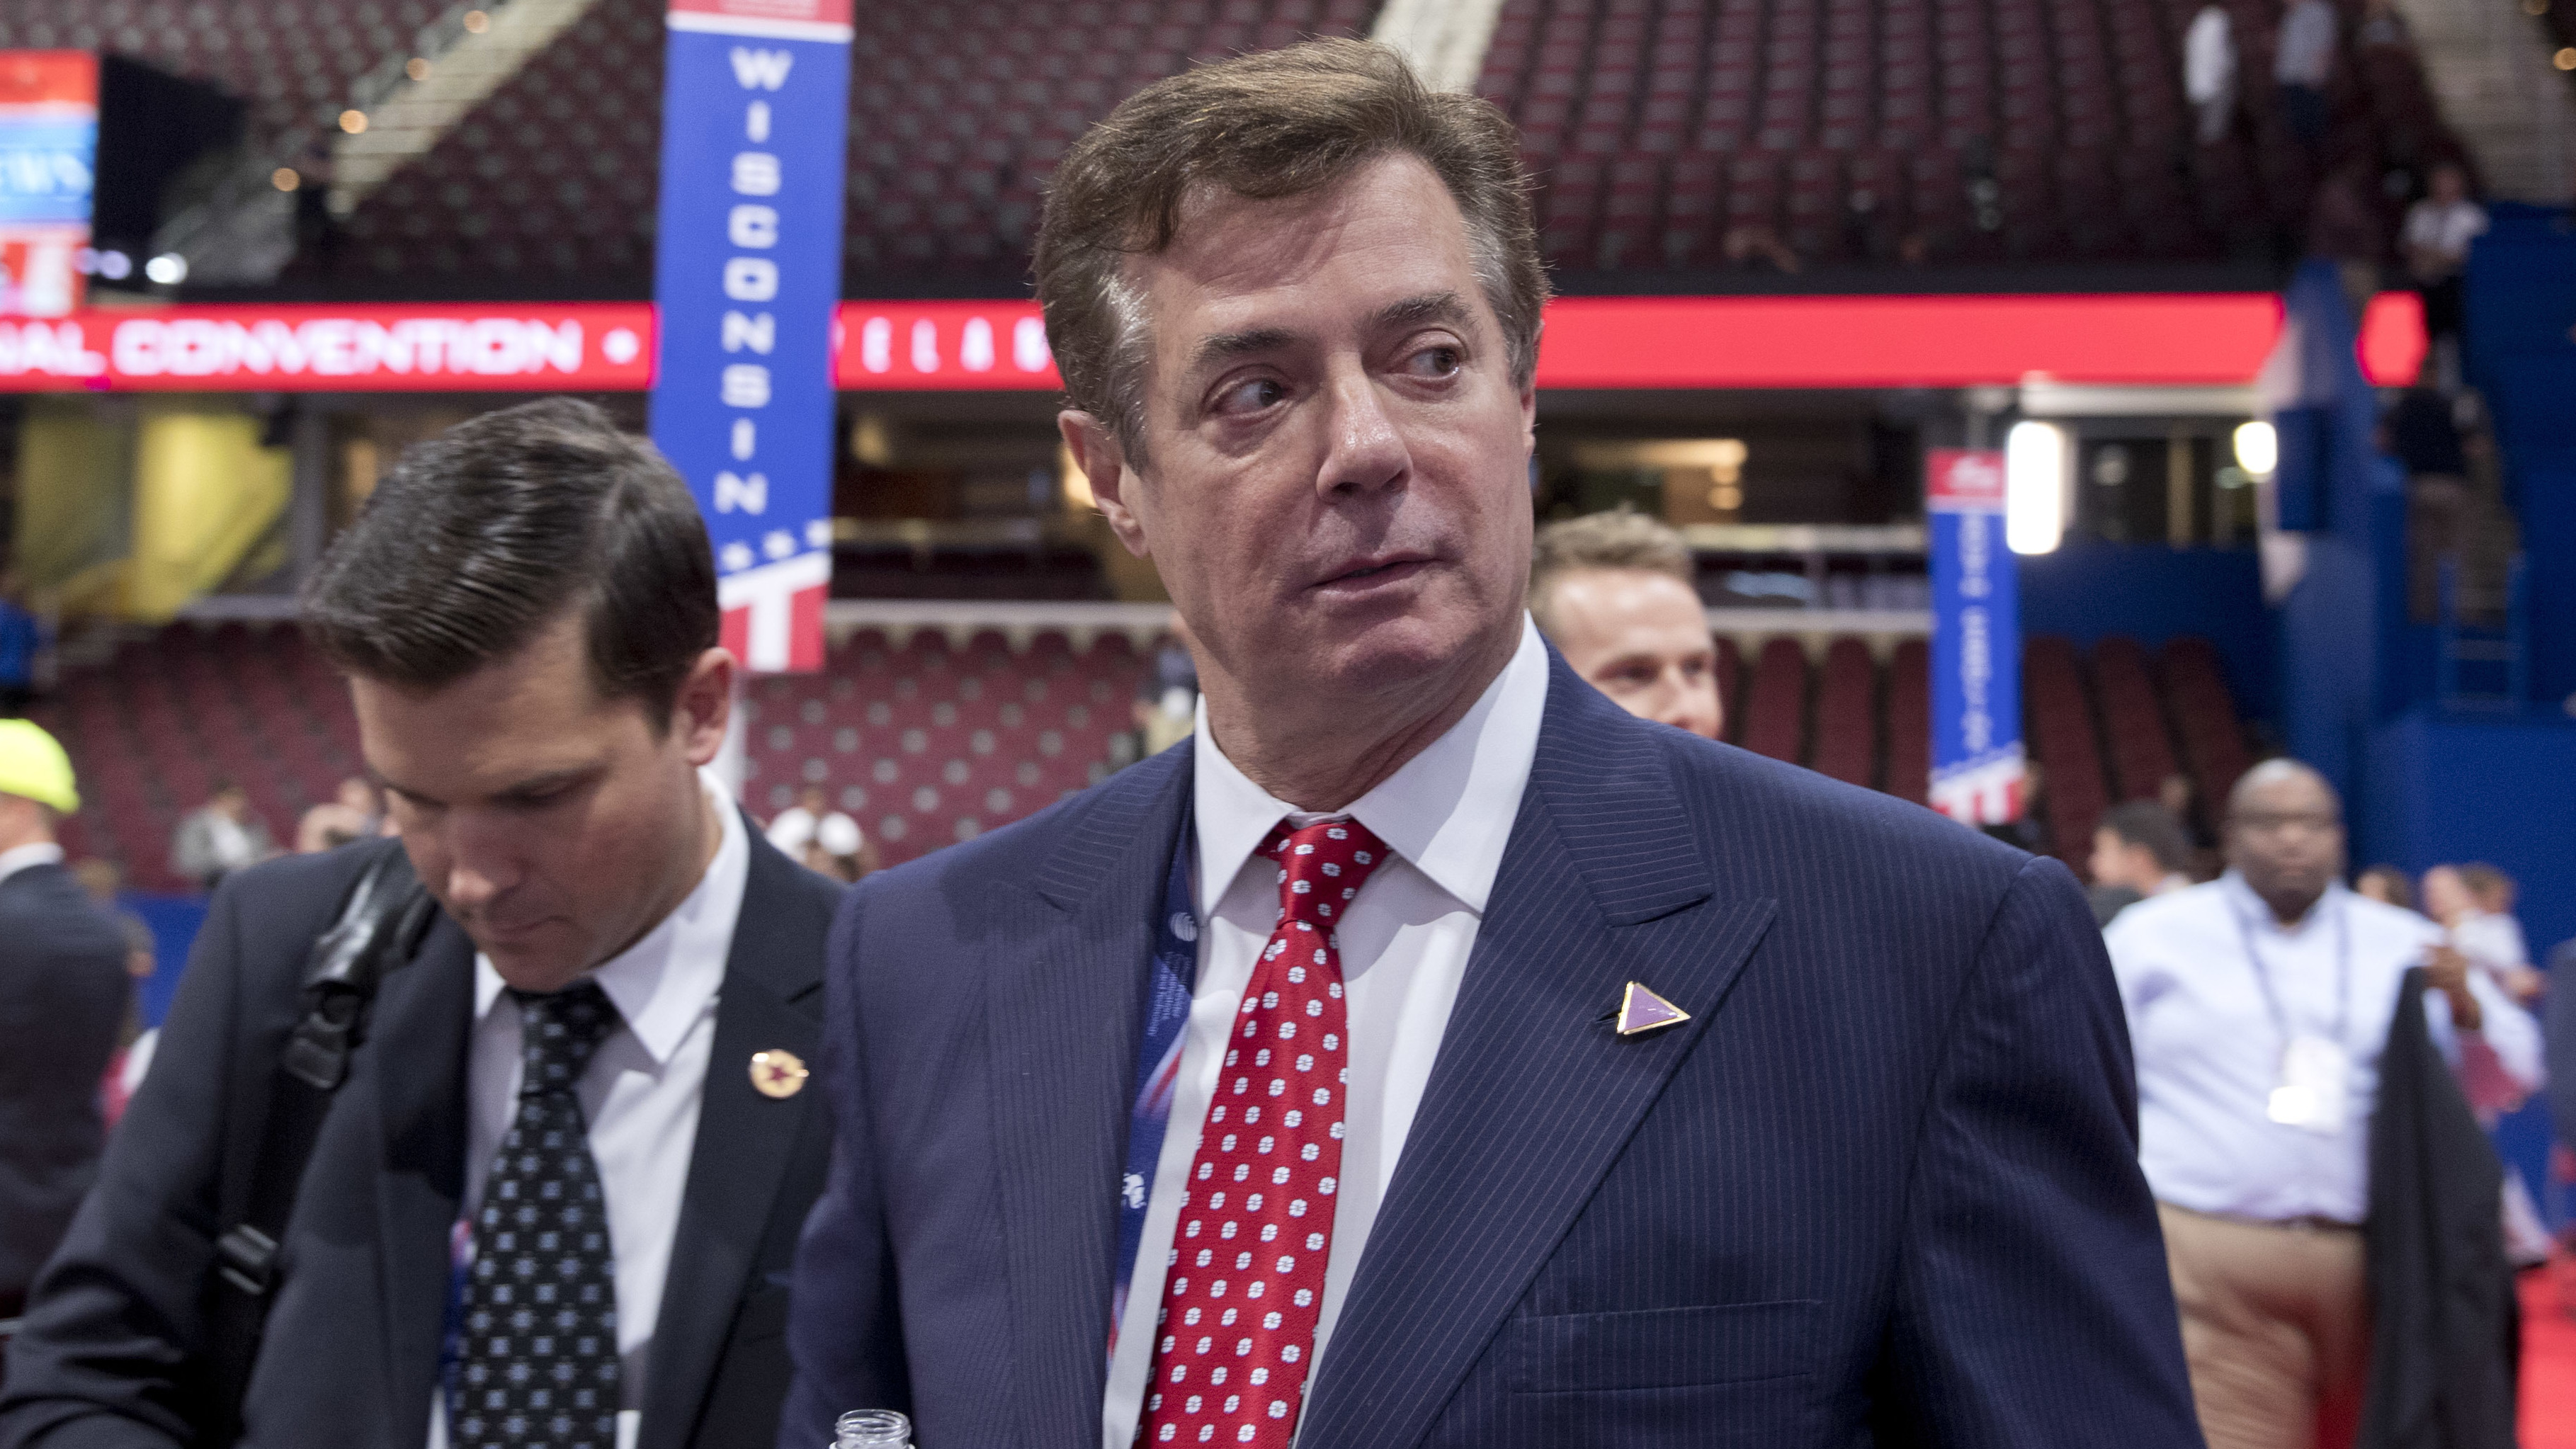 Trump campaign chairman Paul Manafort, shown here on the floor of the Republican National Convention in Cleveland last month, has done consulting work in Ukraine. (Carolyn Kaster, Associated Press)